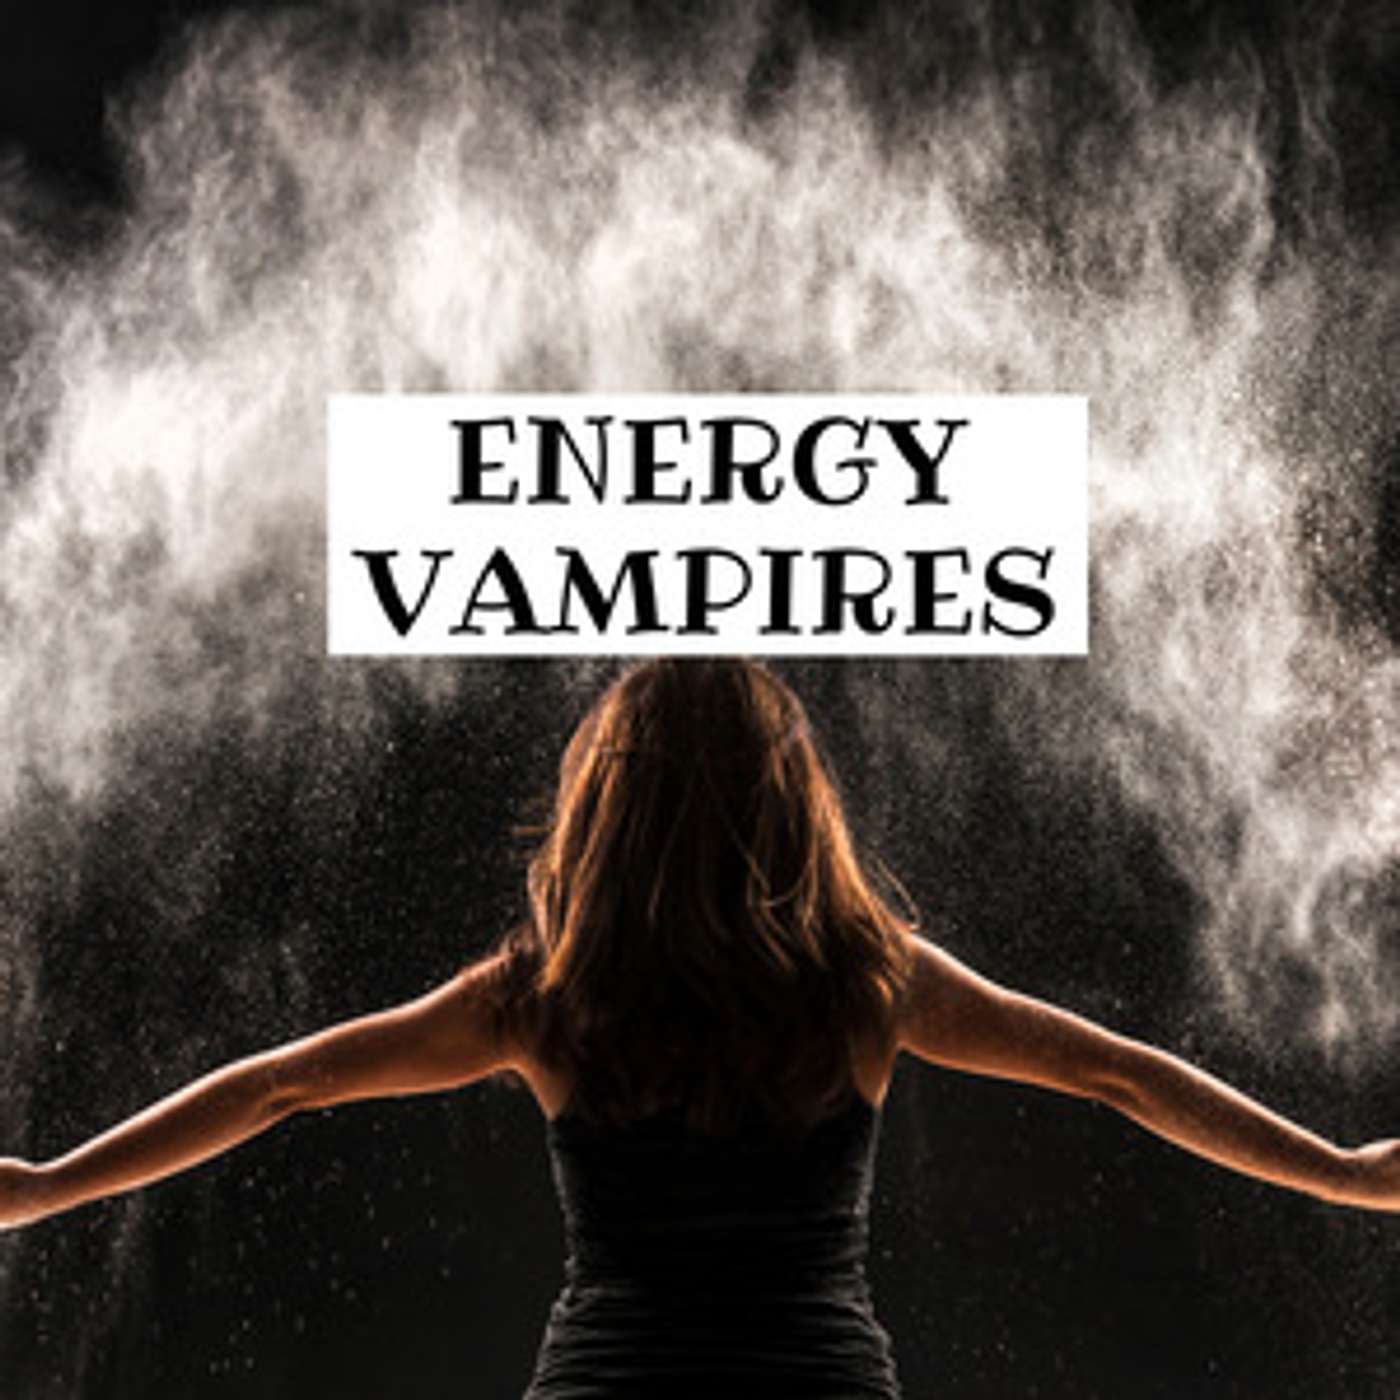 Energy Vampires: Is it All About Narcissistic Supply